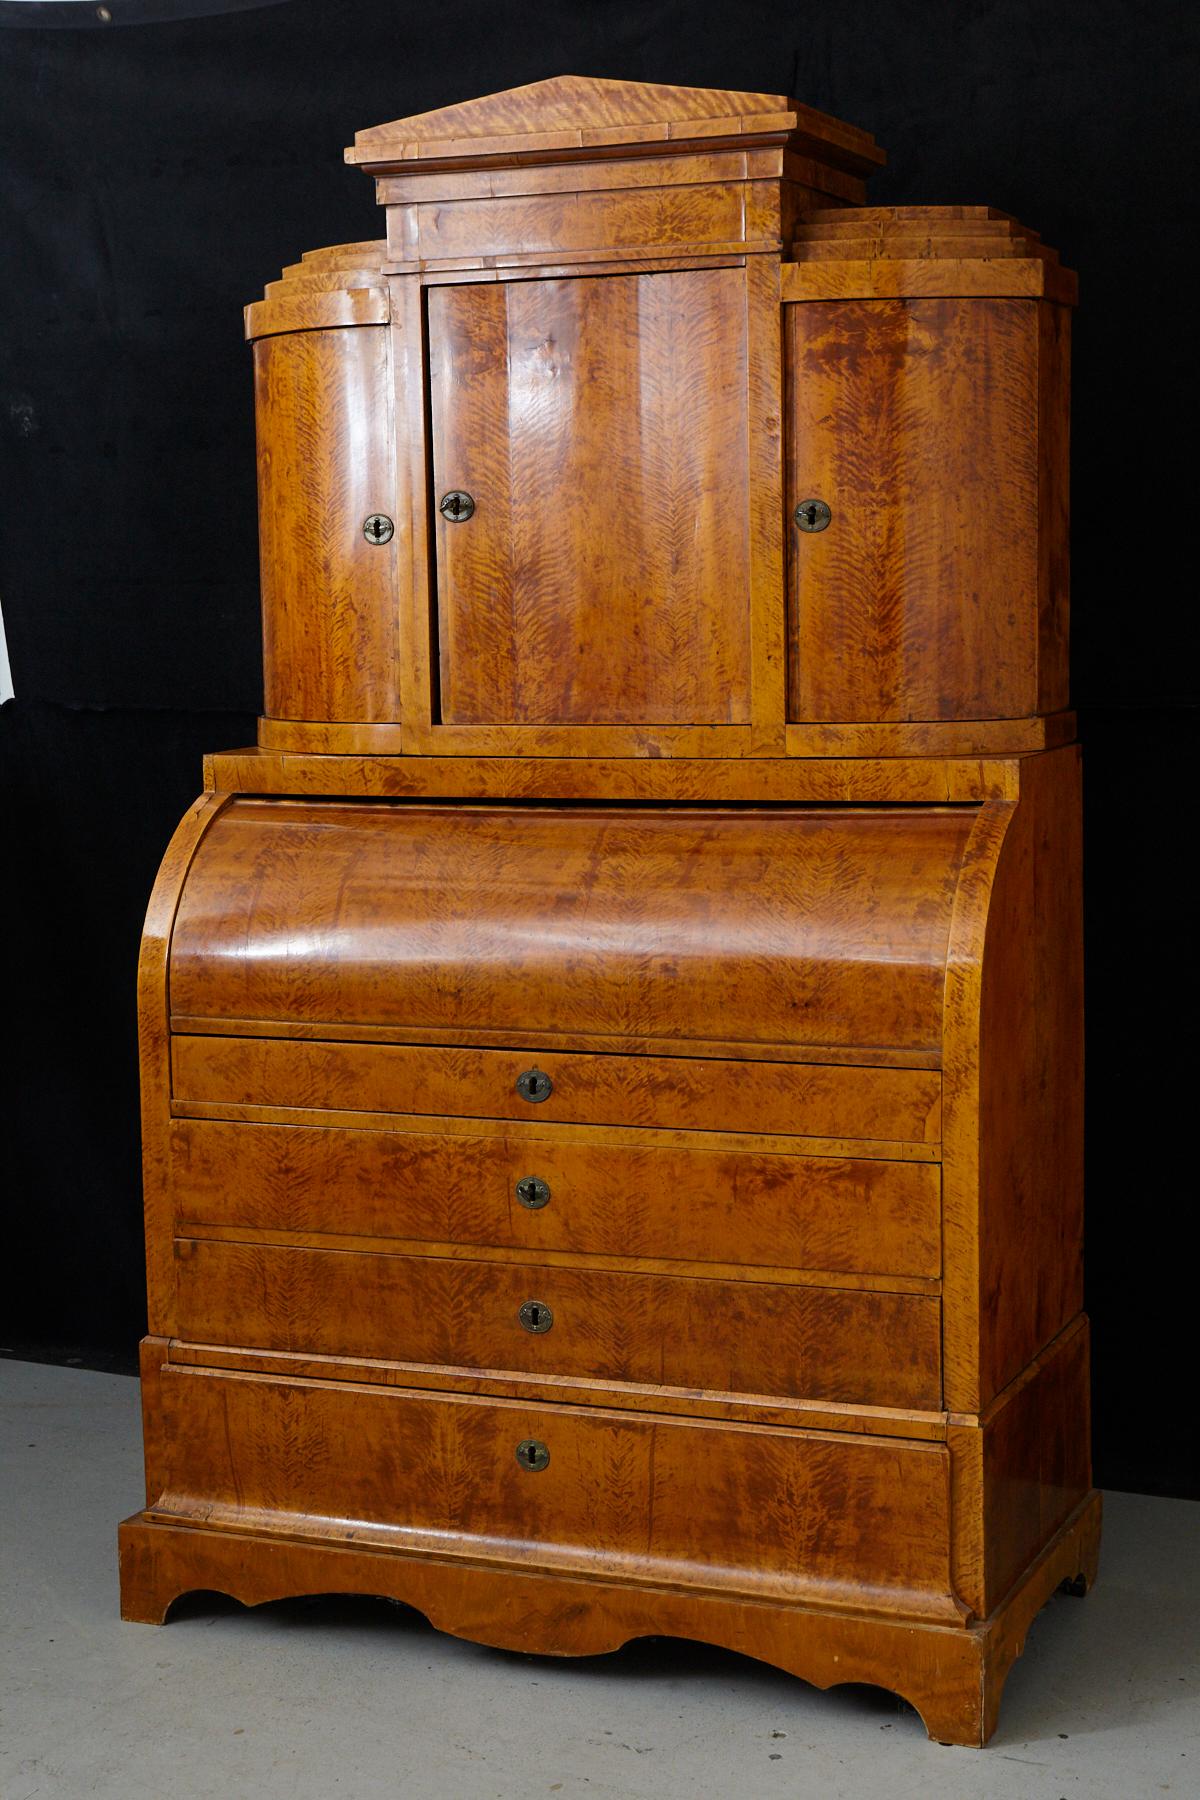 Fine walnut veneer Biedermeier cylinder secretaire/bureau, circa 1870. Typical construction with three sections. The top section has a superstructure with a central door flanked by two concaved side doors. All doors reveal interior shelving.
The